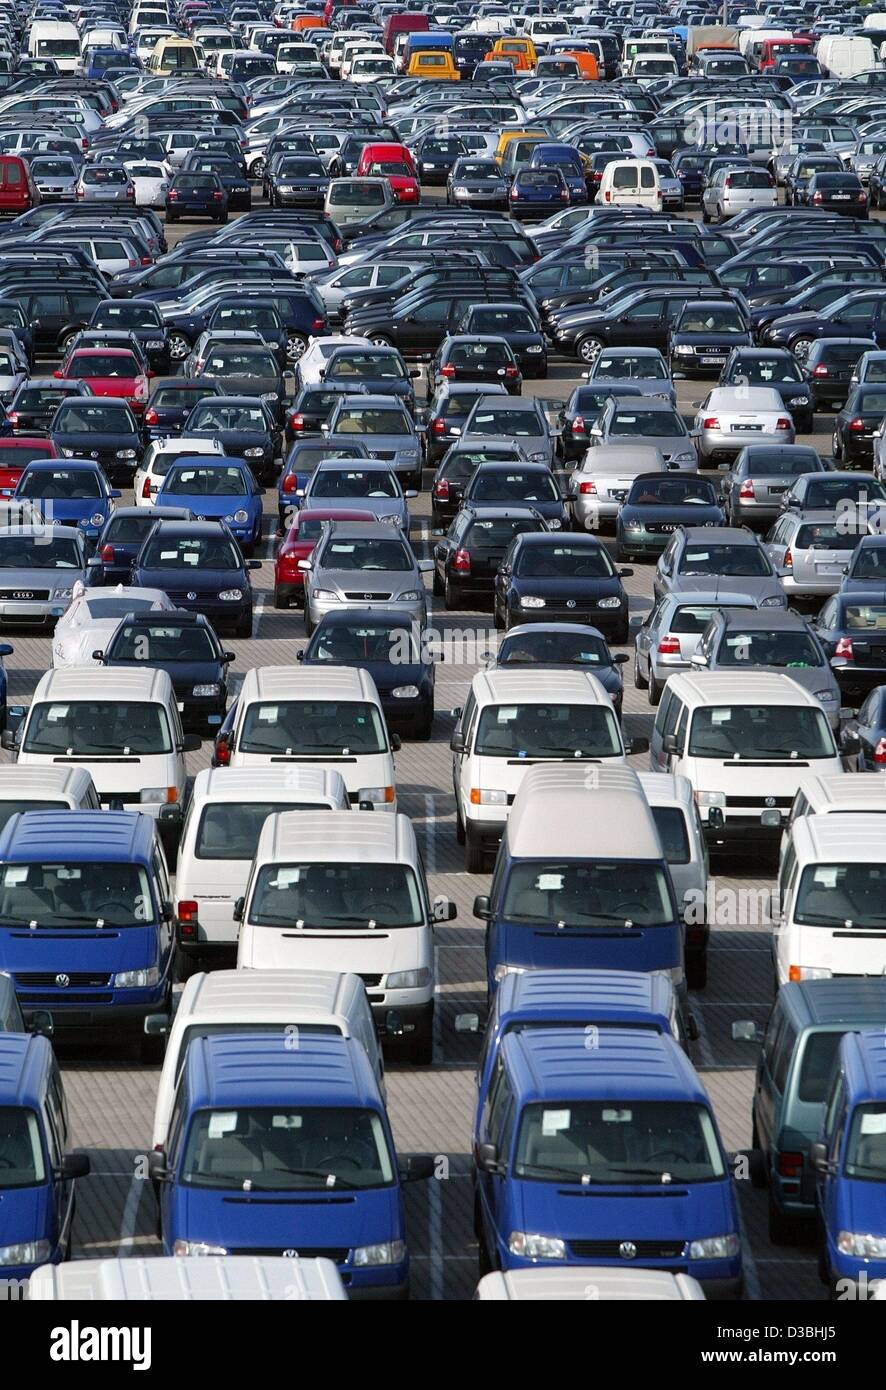 (dpa) - Cars 'made in Germany' are parked on the lot of the Richard Lawson Auto Logistic company in Lehrte, Germany, 7 May 2003. According to the German Statistical Office, exports to the United States have immensely increased in 2002 and mainly contributed to set a new record in the German foreign  Stock Photo